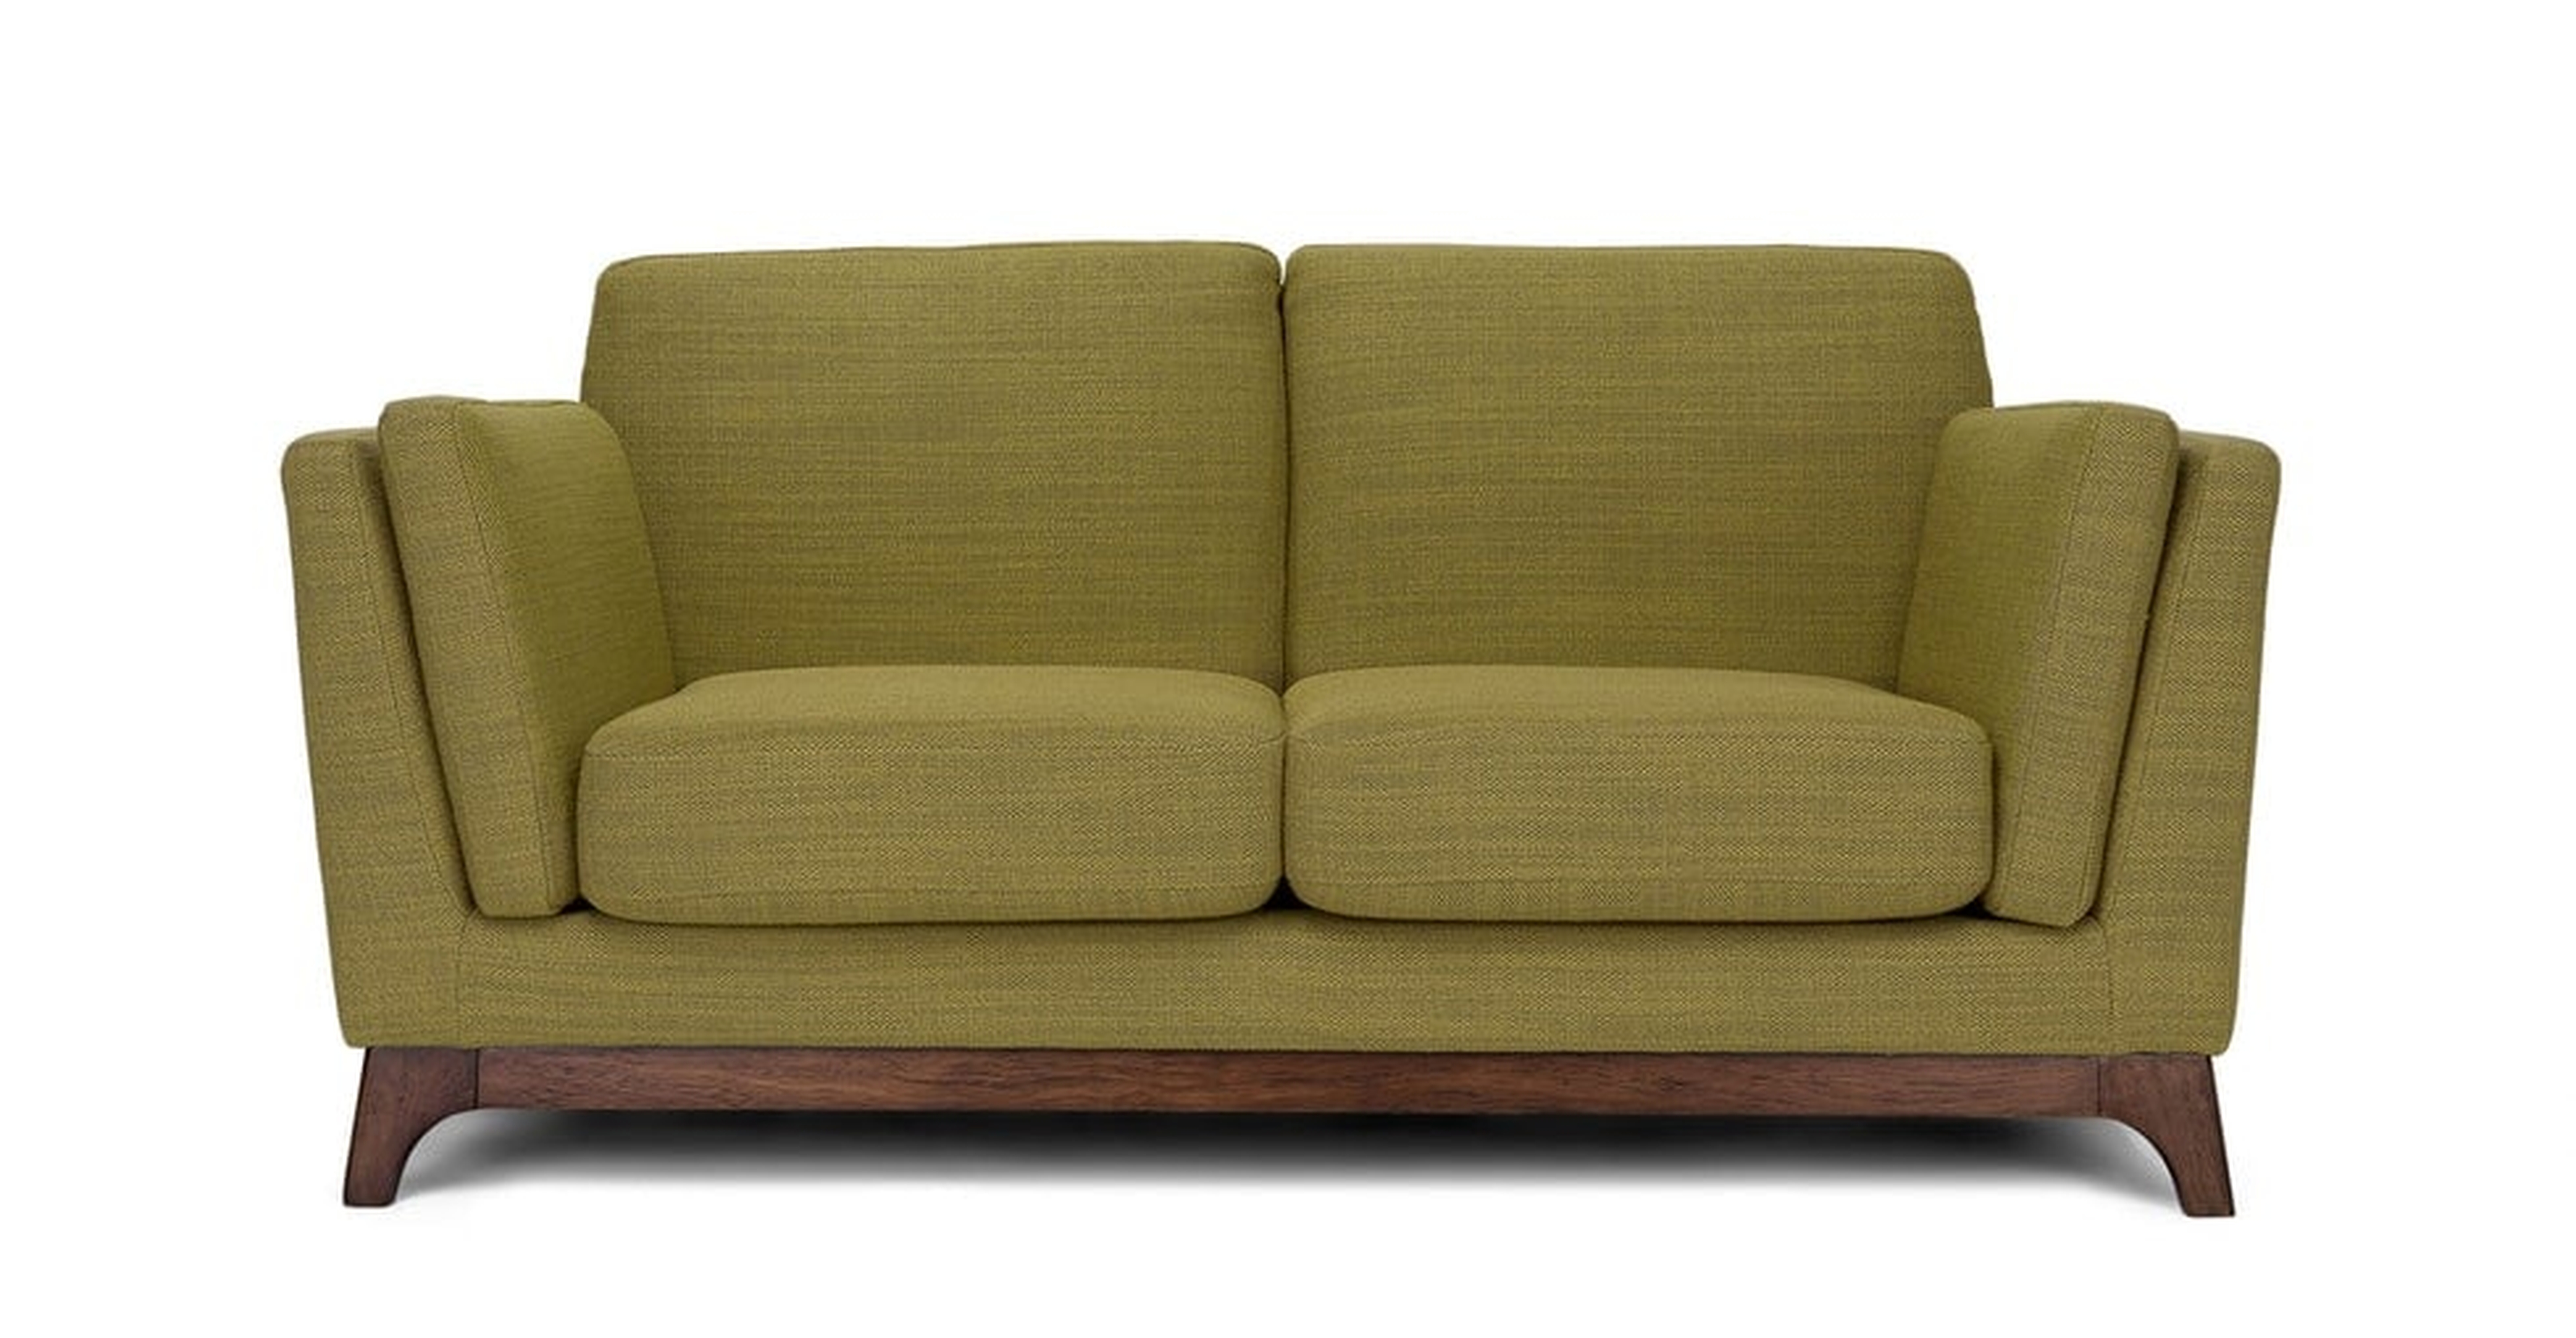 Ceni Seagrass Green Loveseat - Article